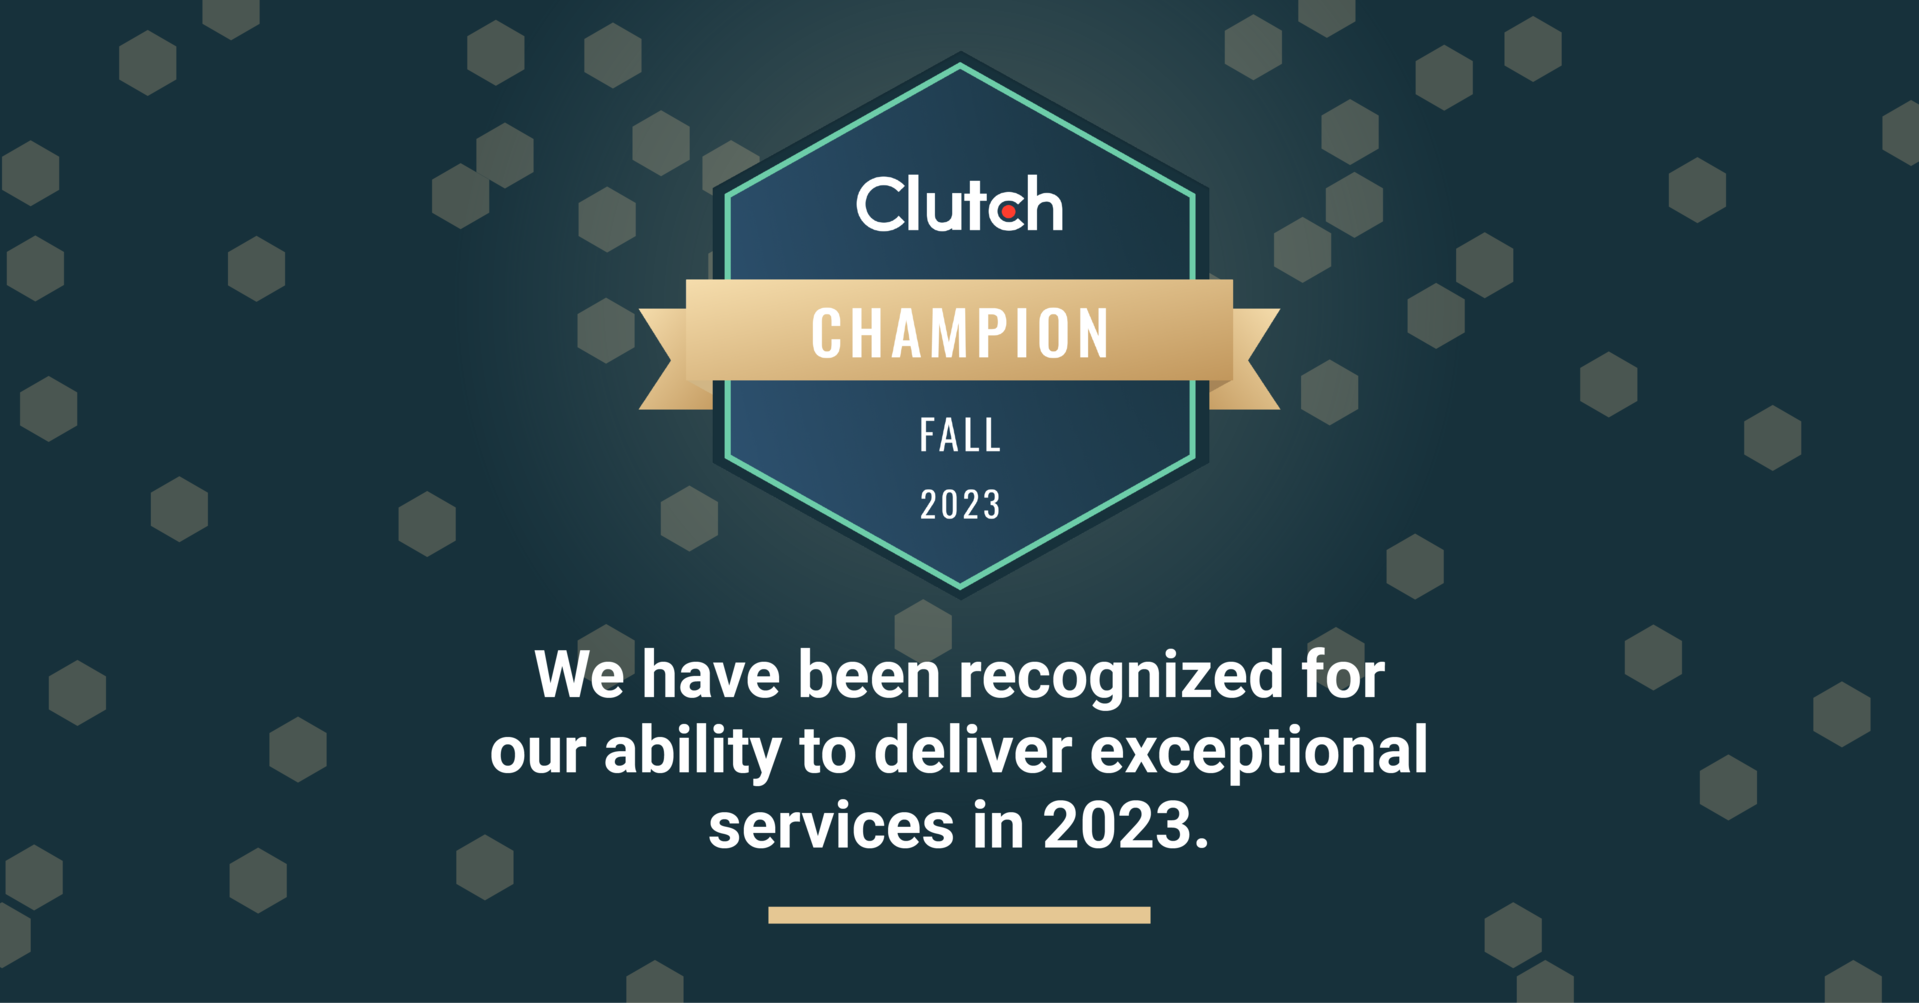 Our Clutch Champion Award